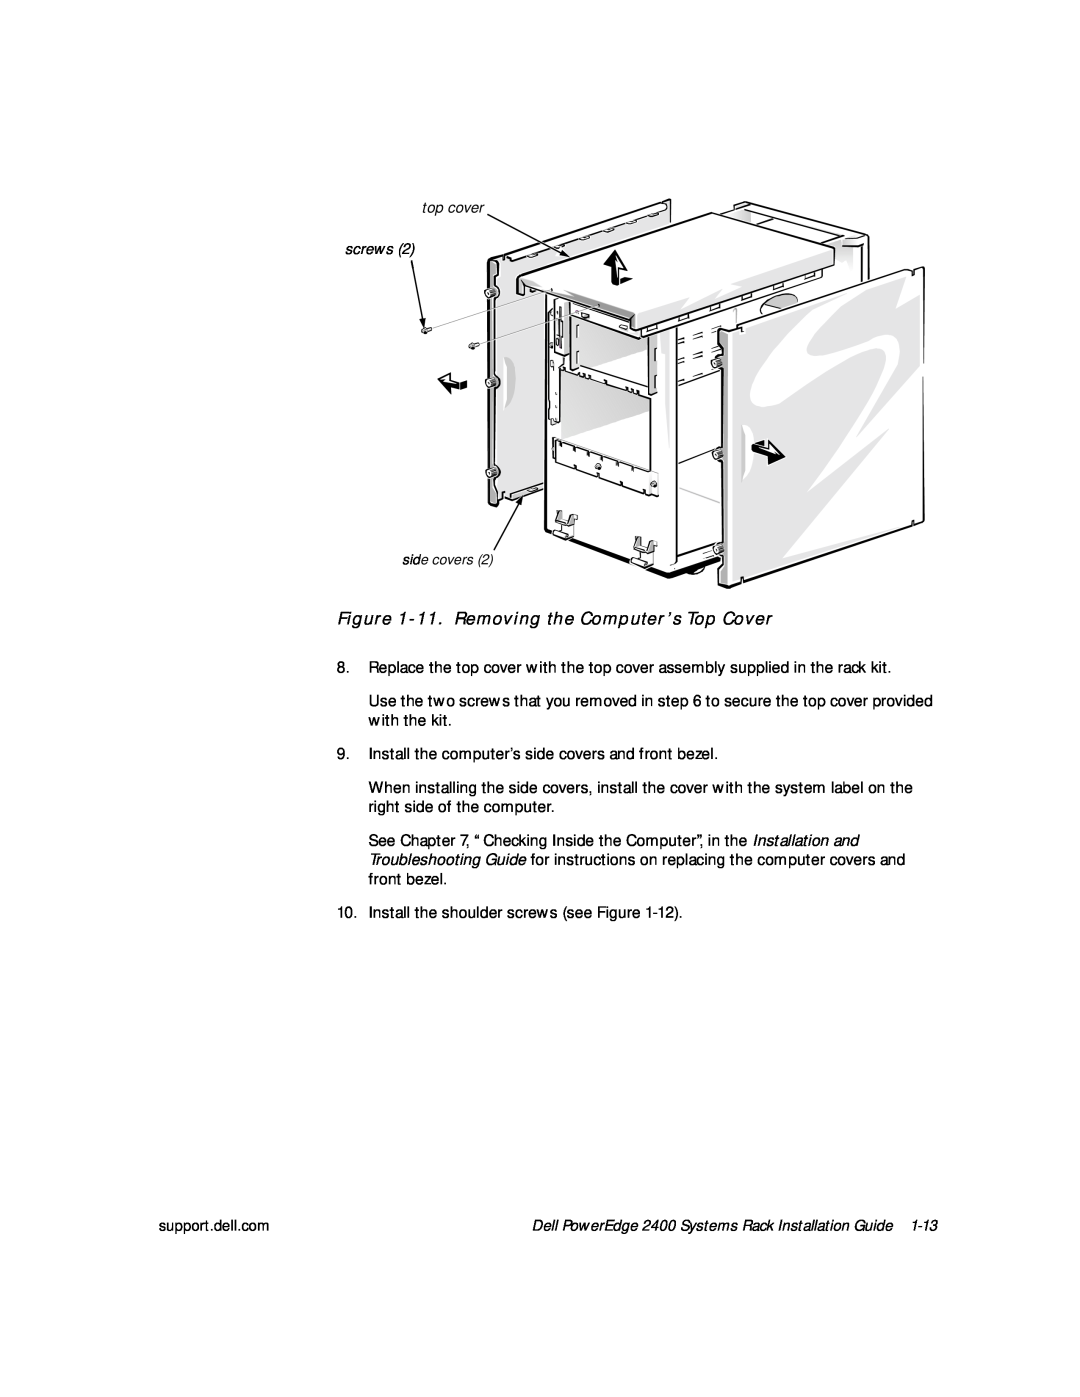 Dell 2400 manual 11.Removing the Computer’s Top Cover 